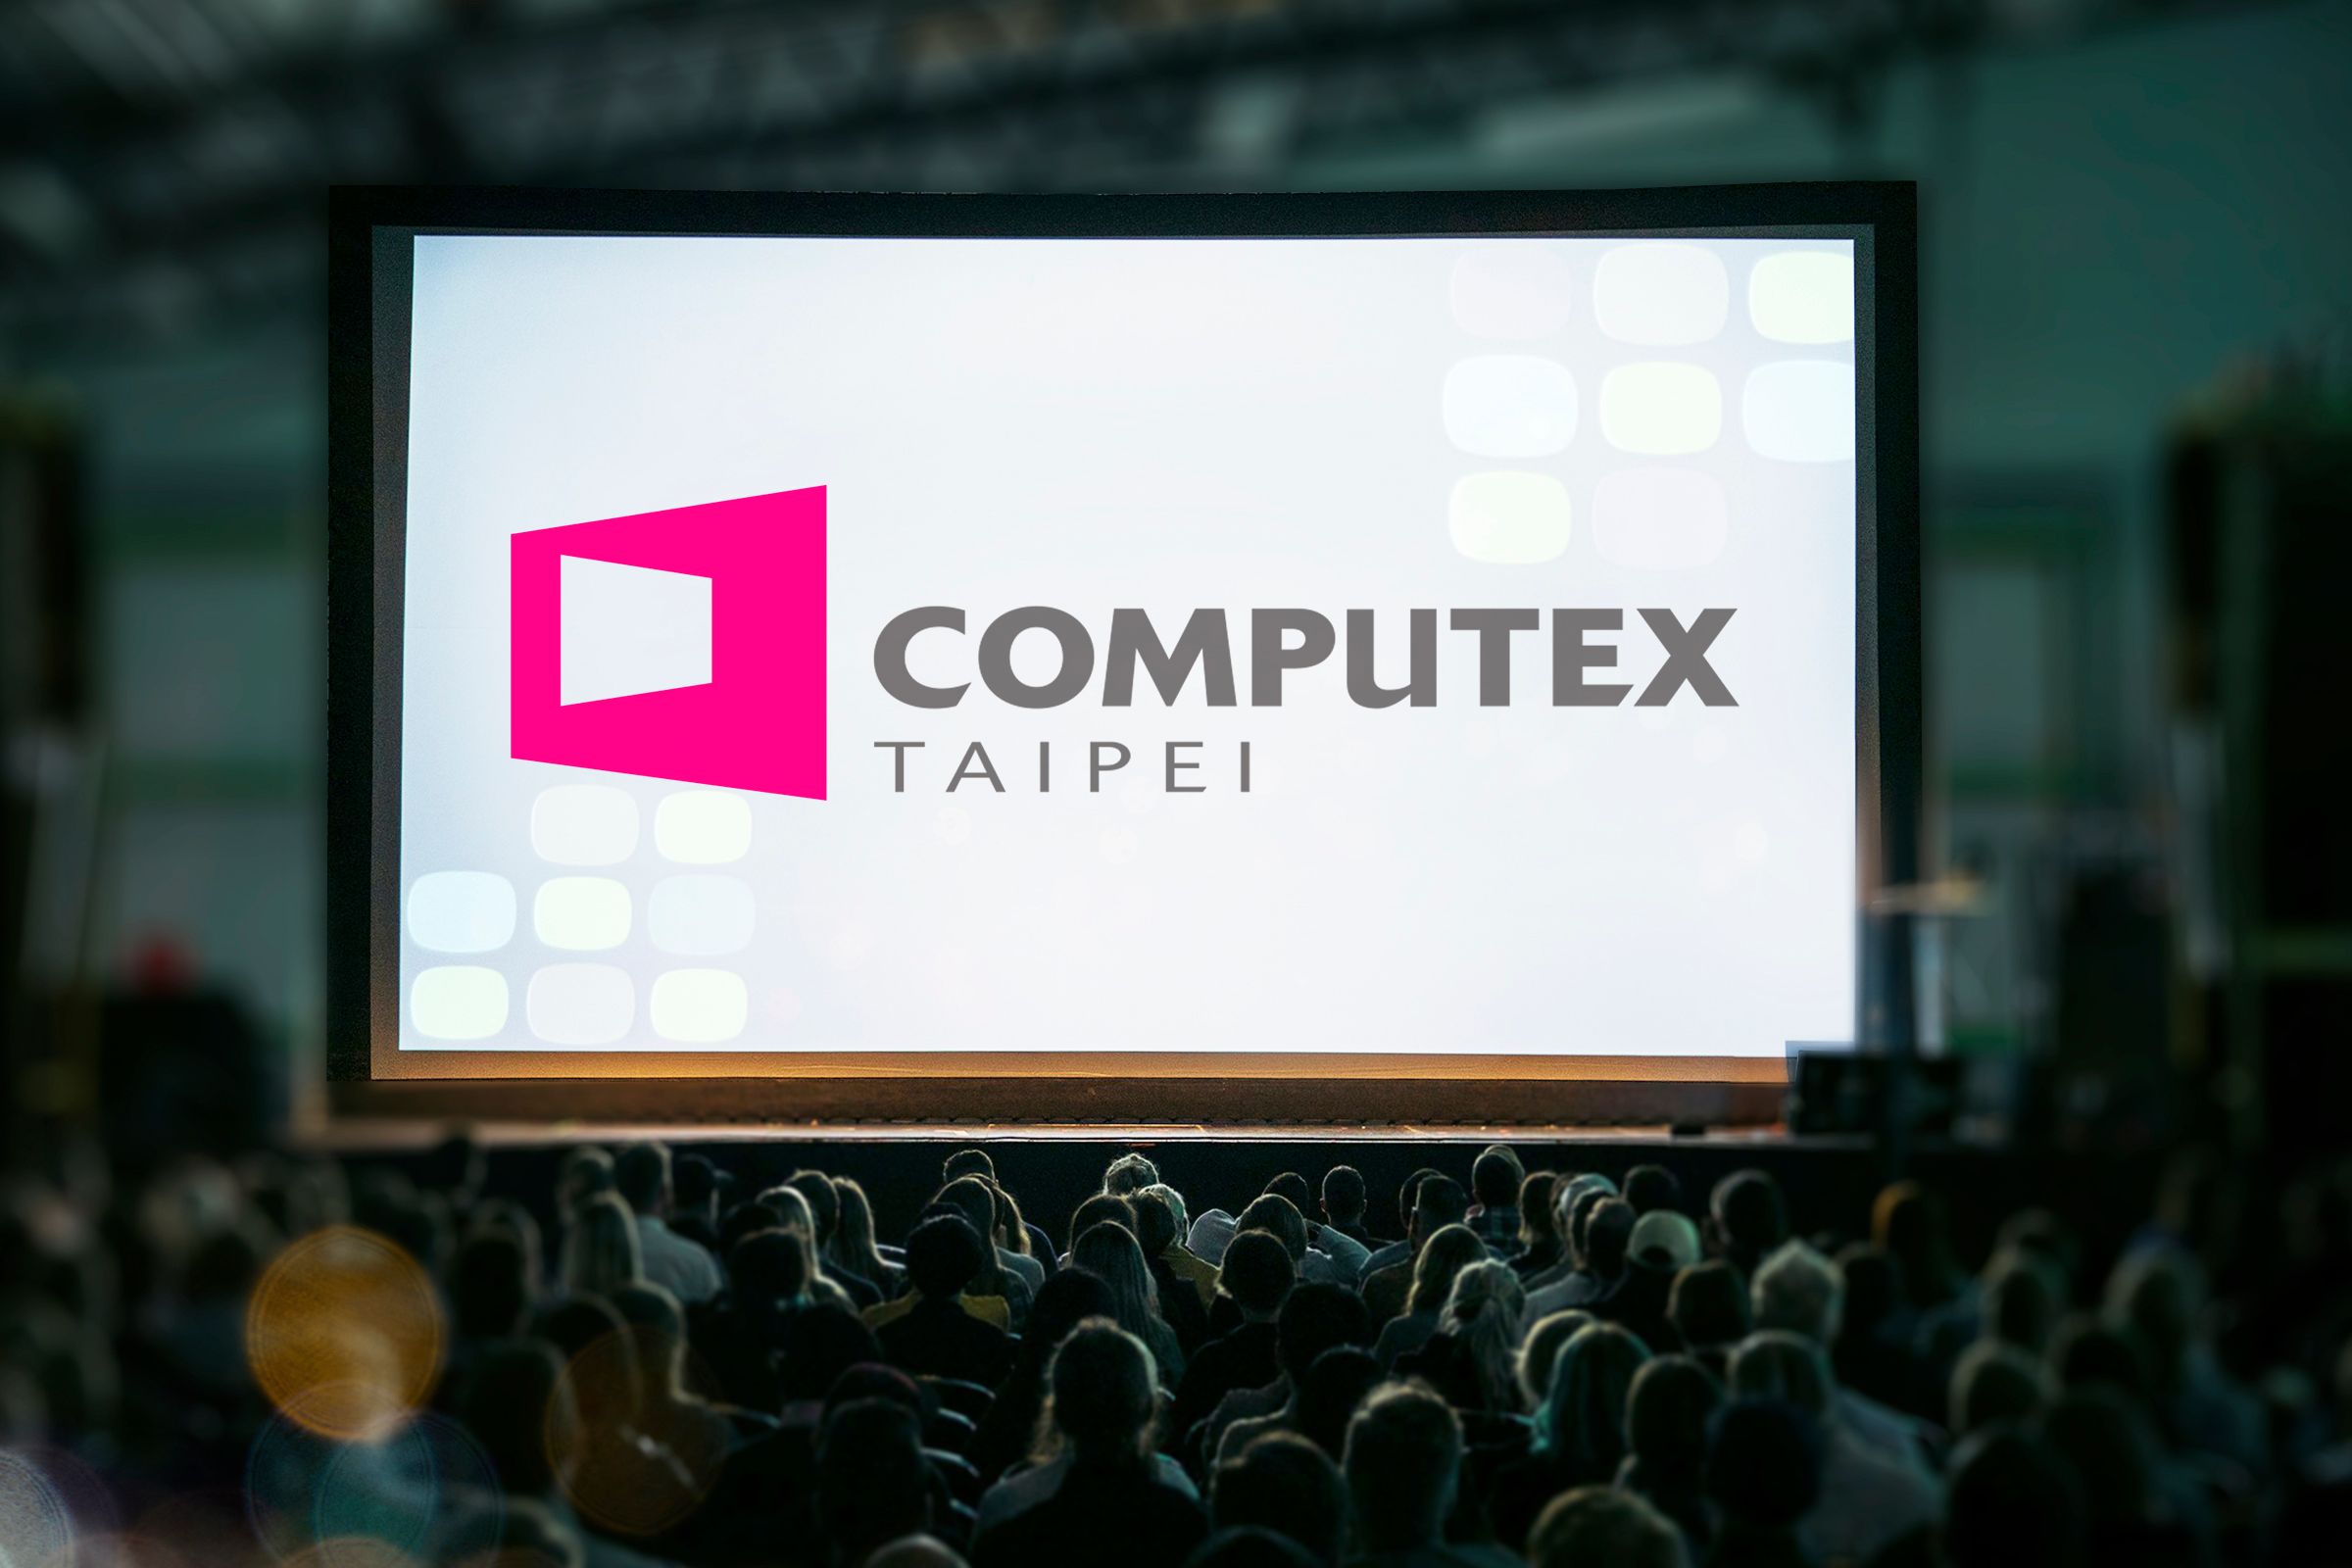 Computex Taipei logo on a screen with an audience watching.